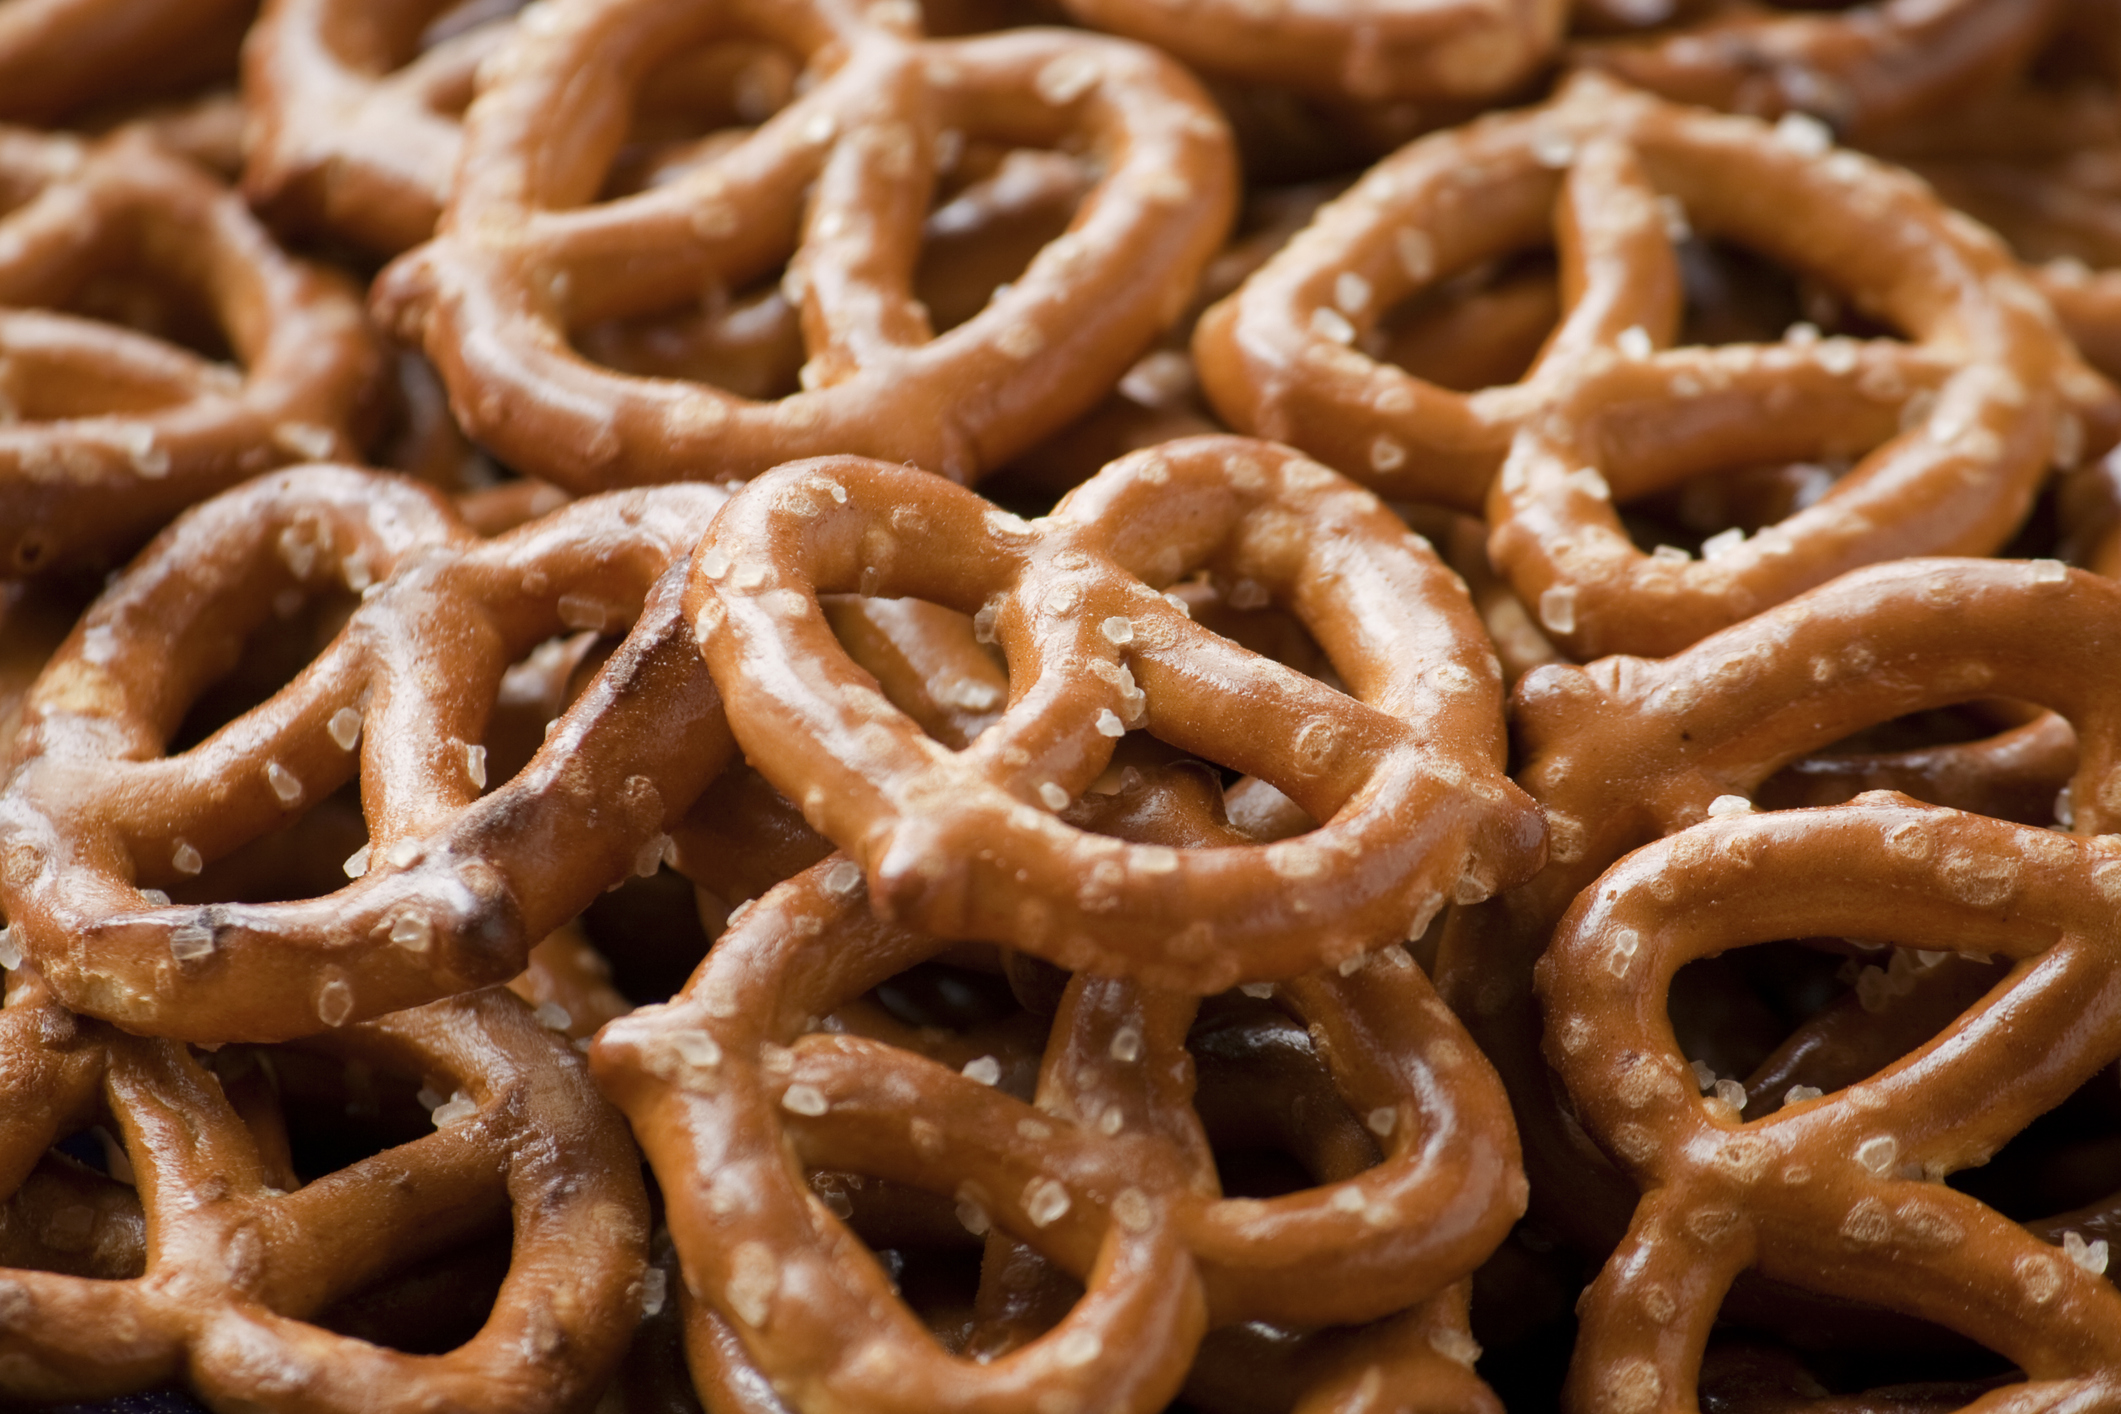 After Not Being Hired For Management Roles Due To His Autism, Marcus Moore Launched His Own Pretzel Business